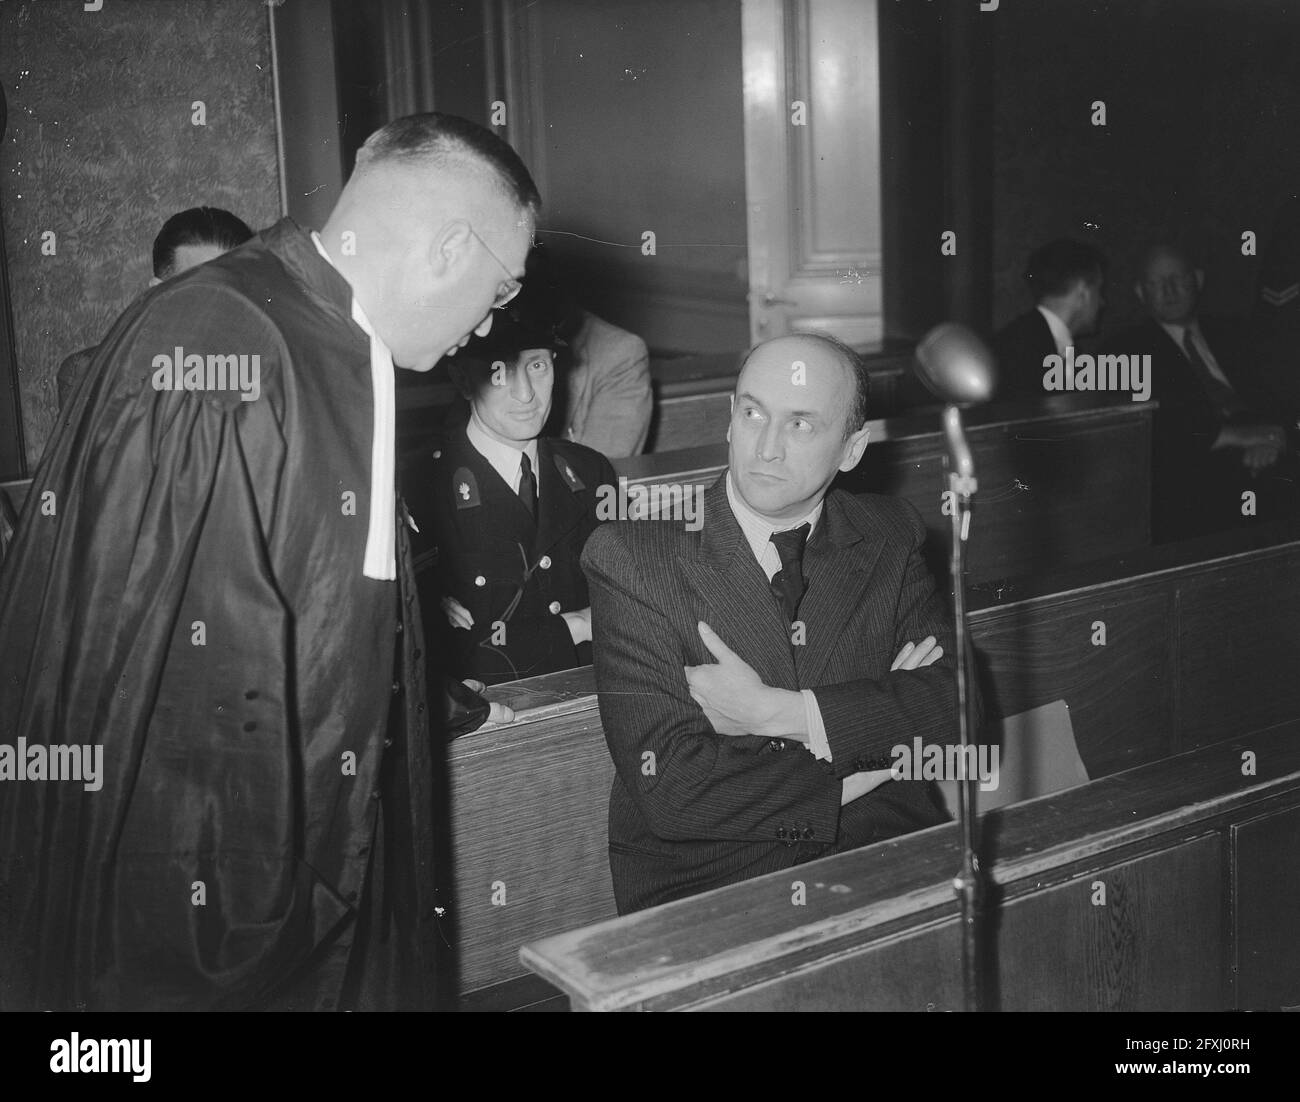 Willy Lages, former chief of the Amsterdam Sicherheitsdienst, during a hearing at the Special Court of Justice in Amsterdam. On the left his lawyer Mr. O.G. Veenstra, July 19, 1949, war criminals, lawsuits, second world war, The Netherlands, 20th century press agency photo, news to remember, documentary, historic photography 1945-1990, visual stories, human history of the Twentieth Century, capturing moments in time Stock Photo